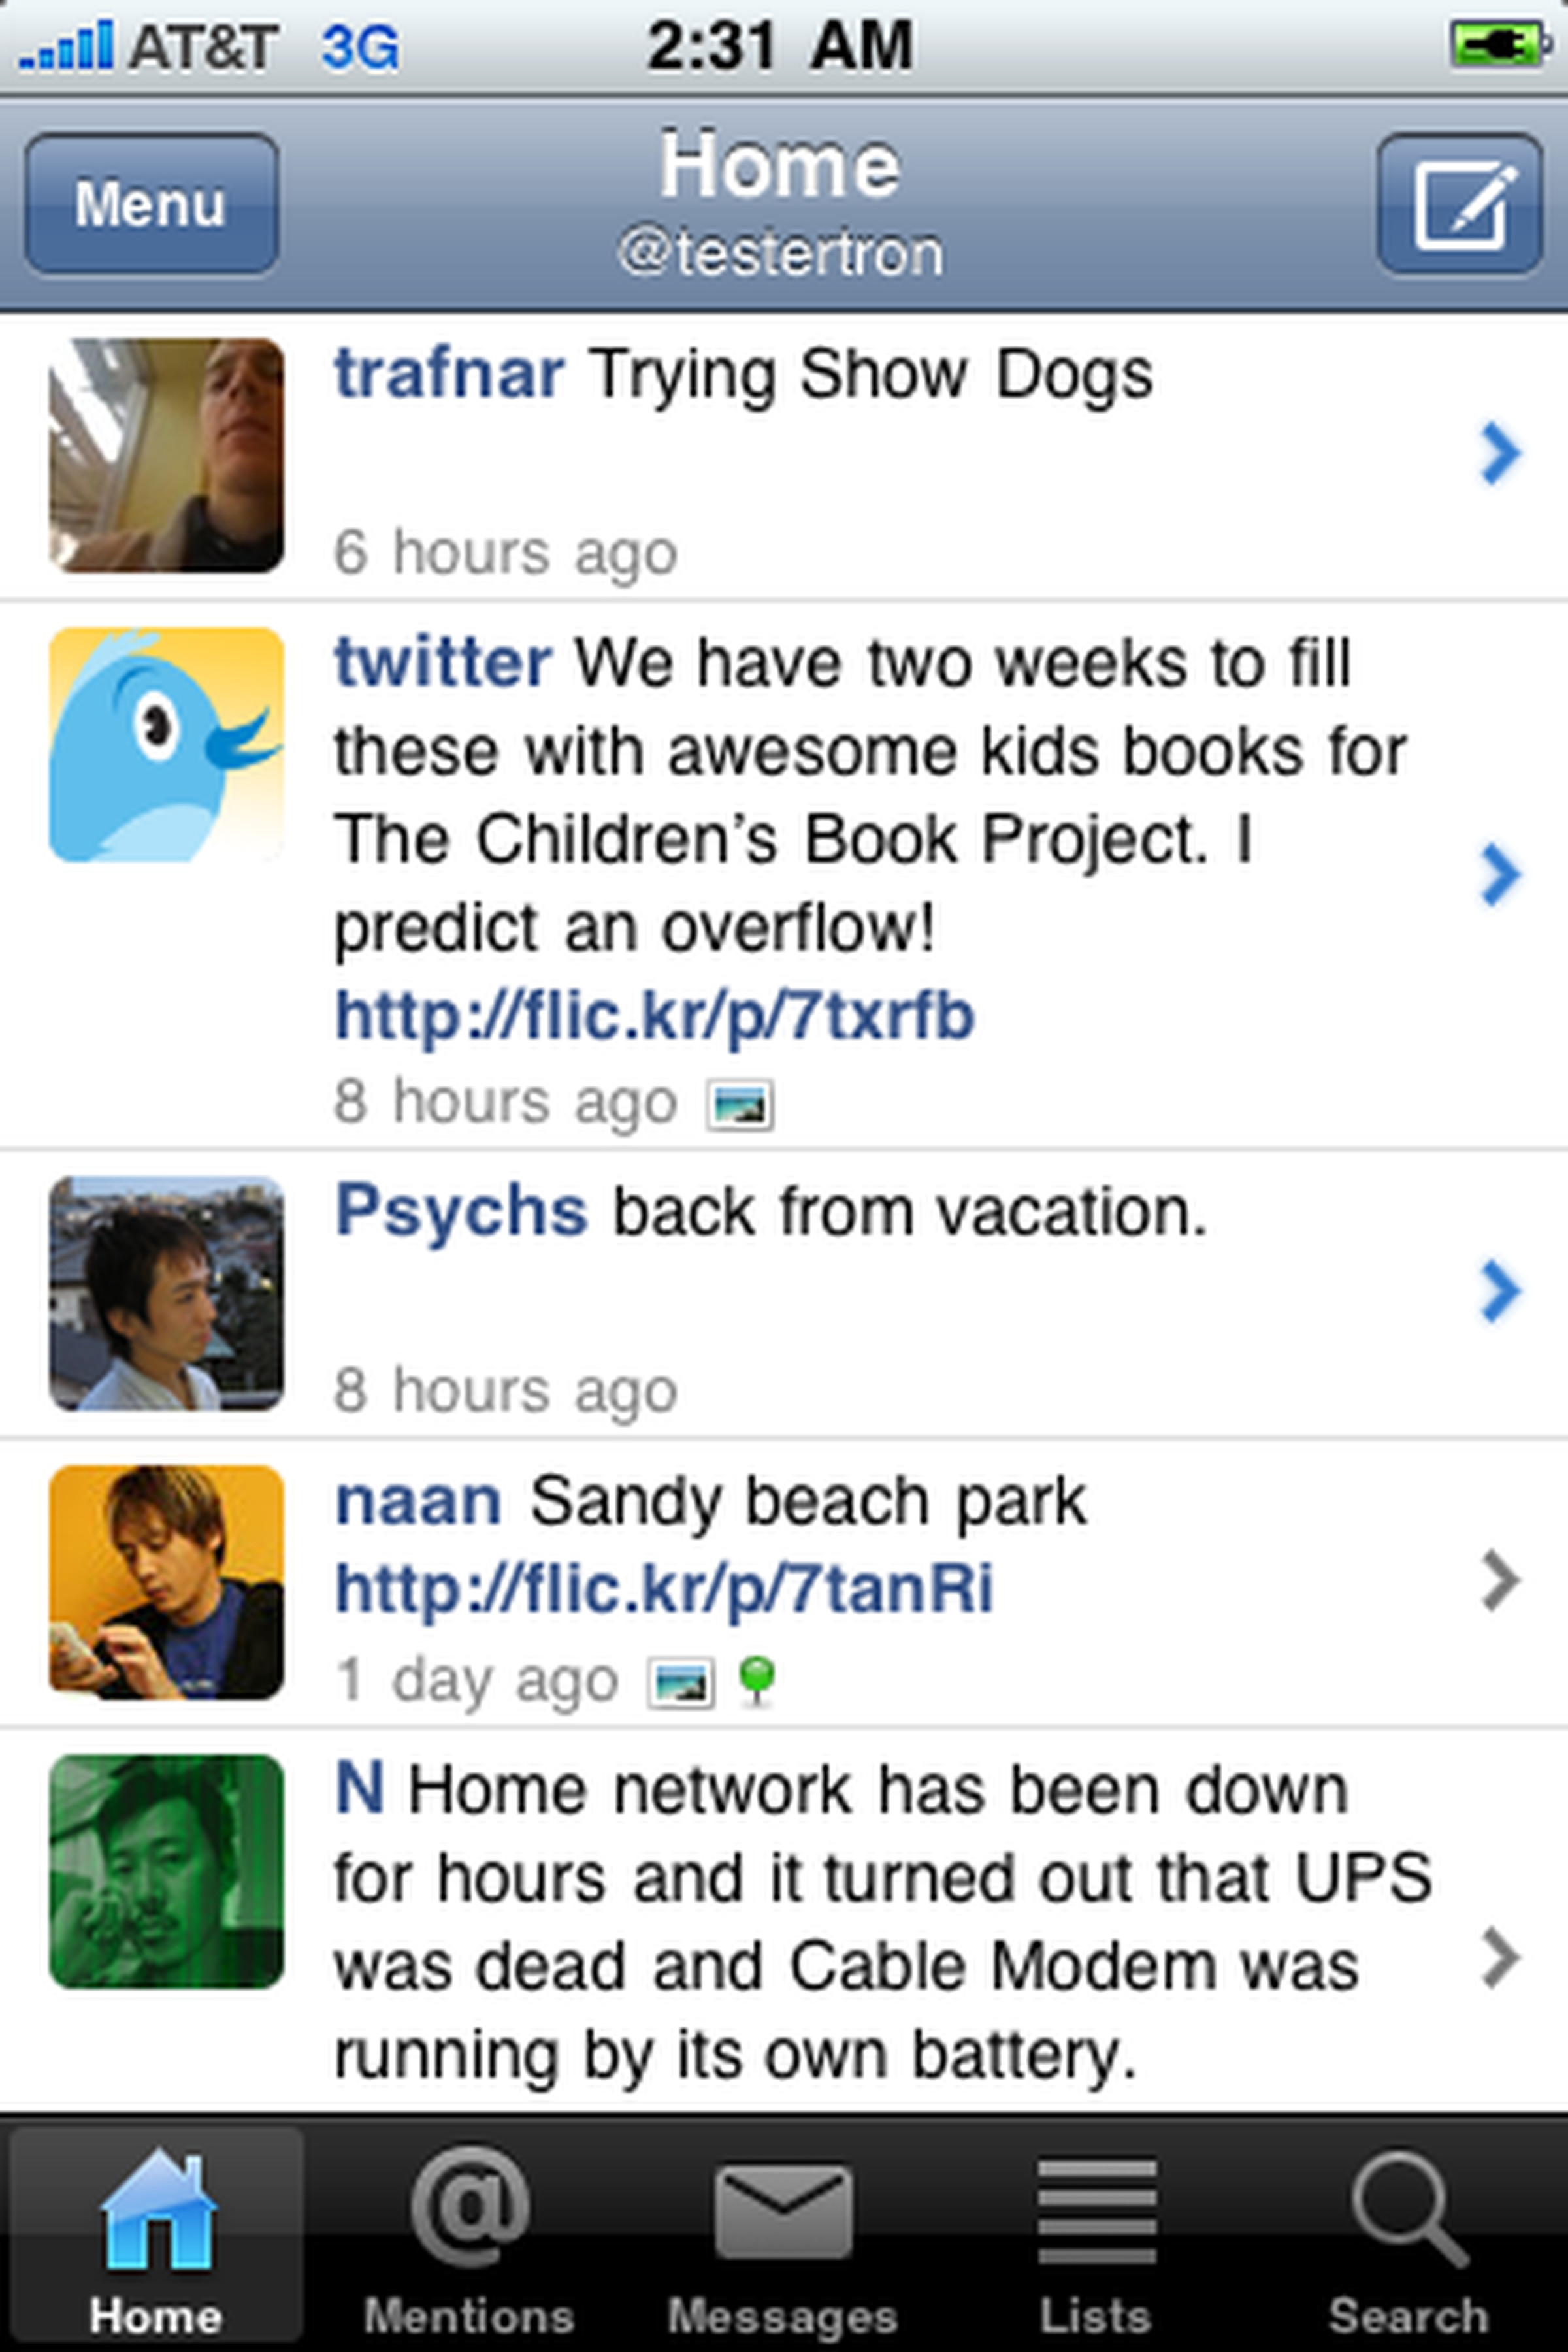 Screenshot of the Echofon Twitter app showing the timeline view.